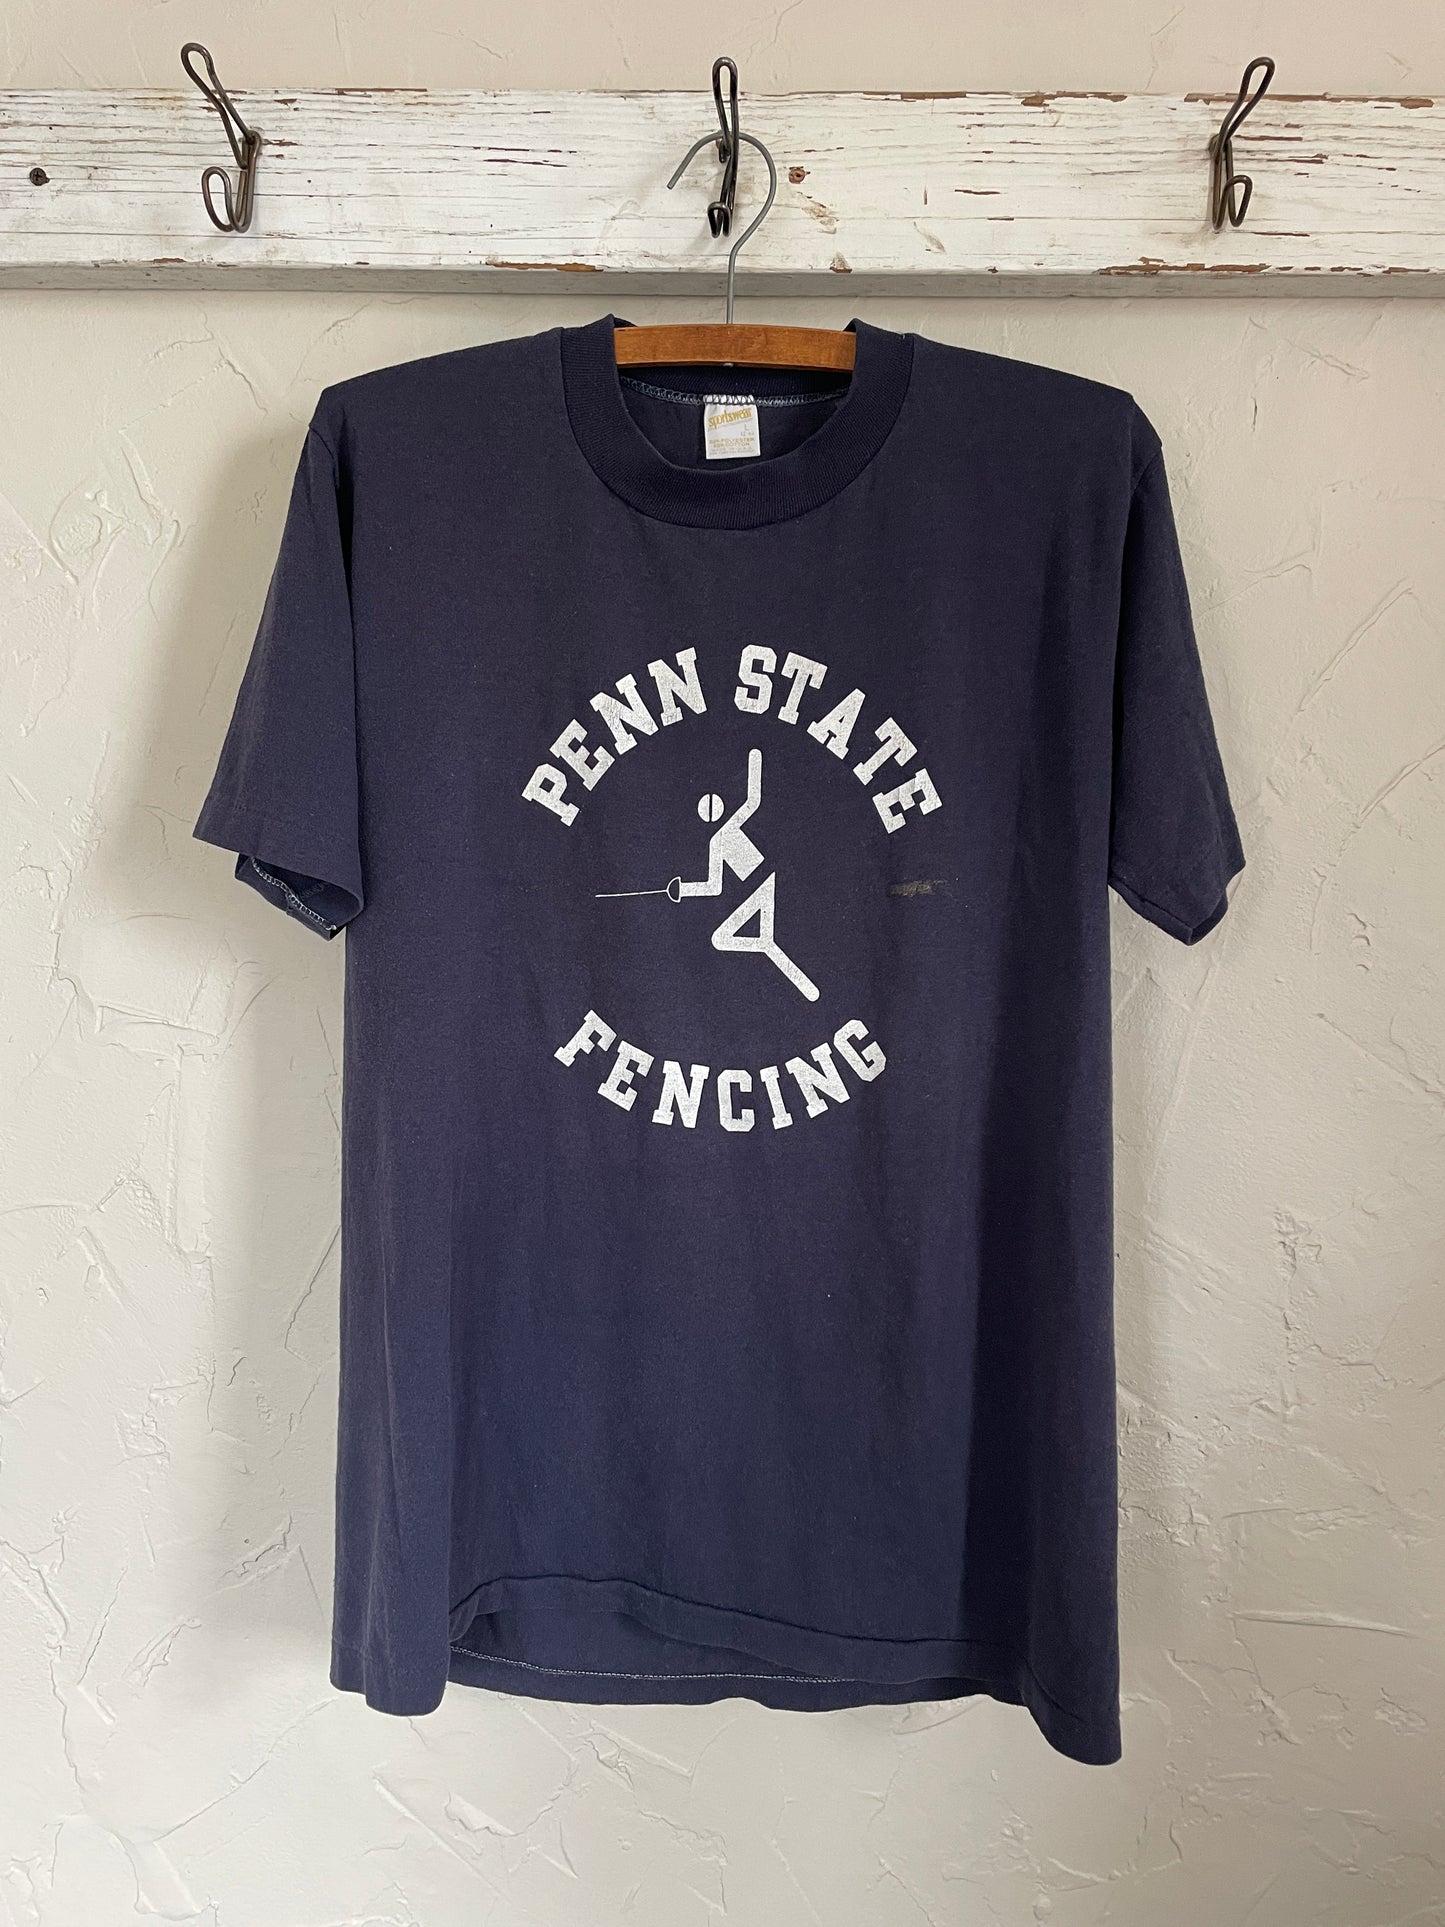 70s/80s Penn State Fencing Tee